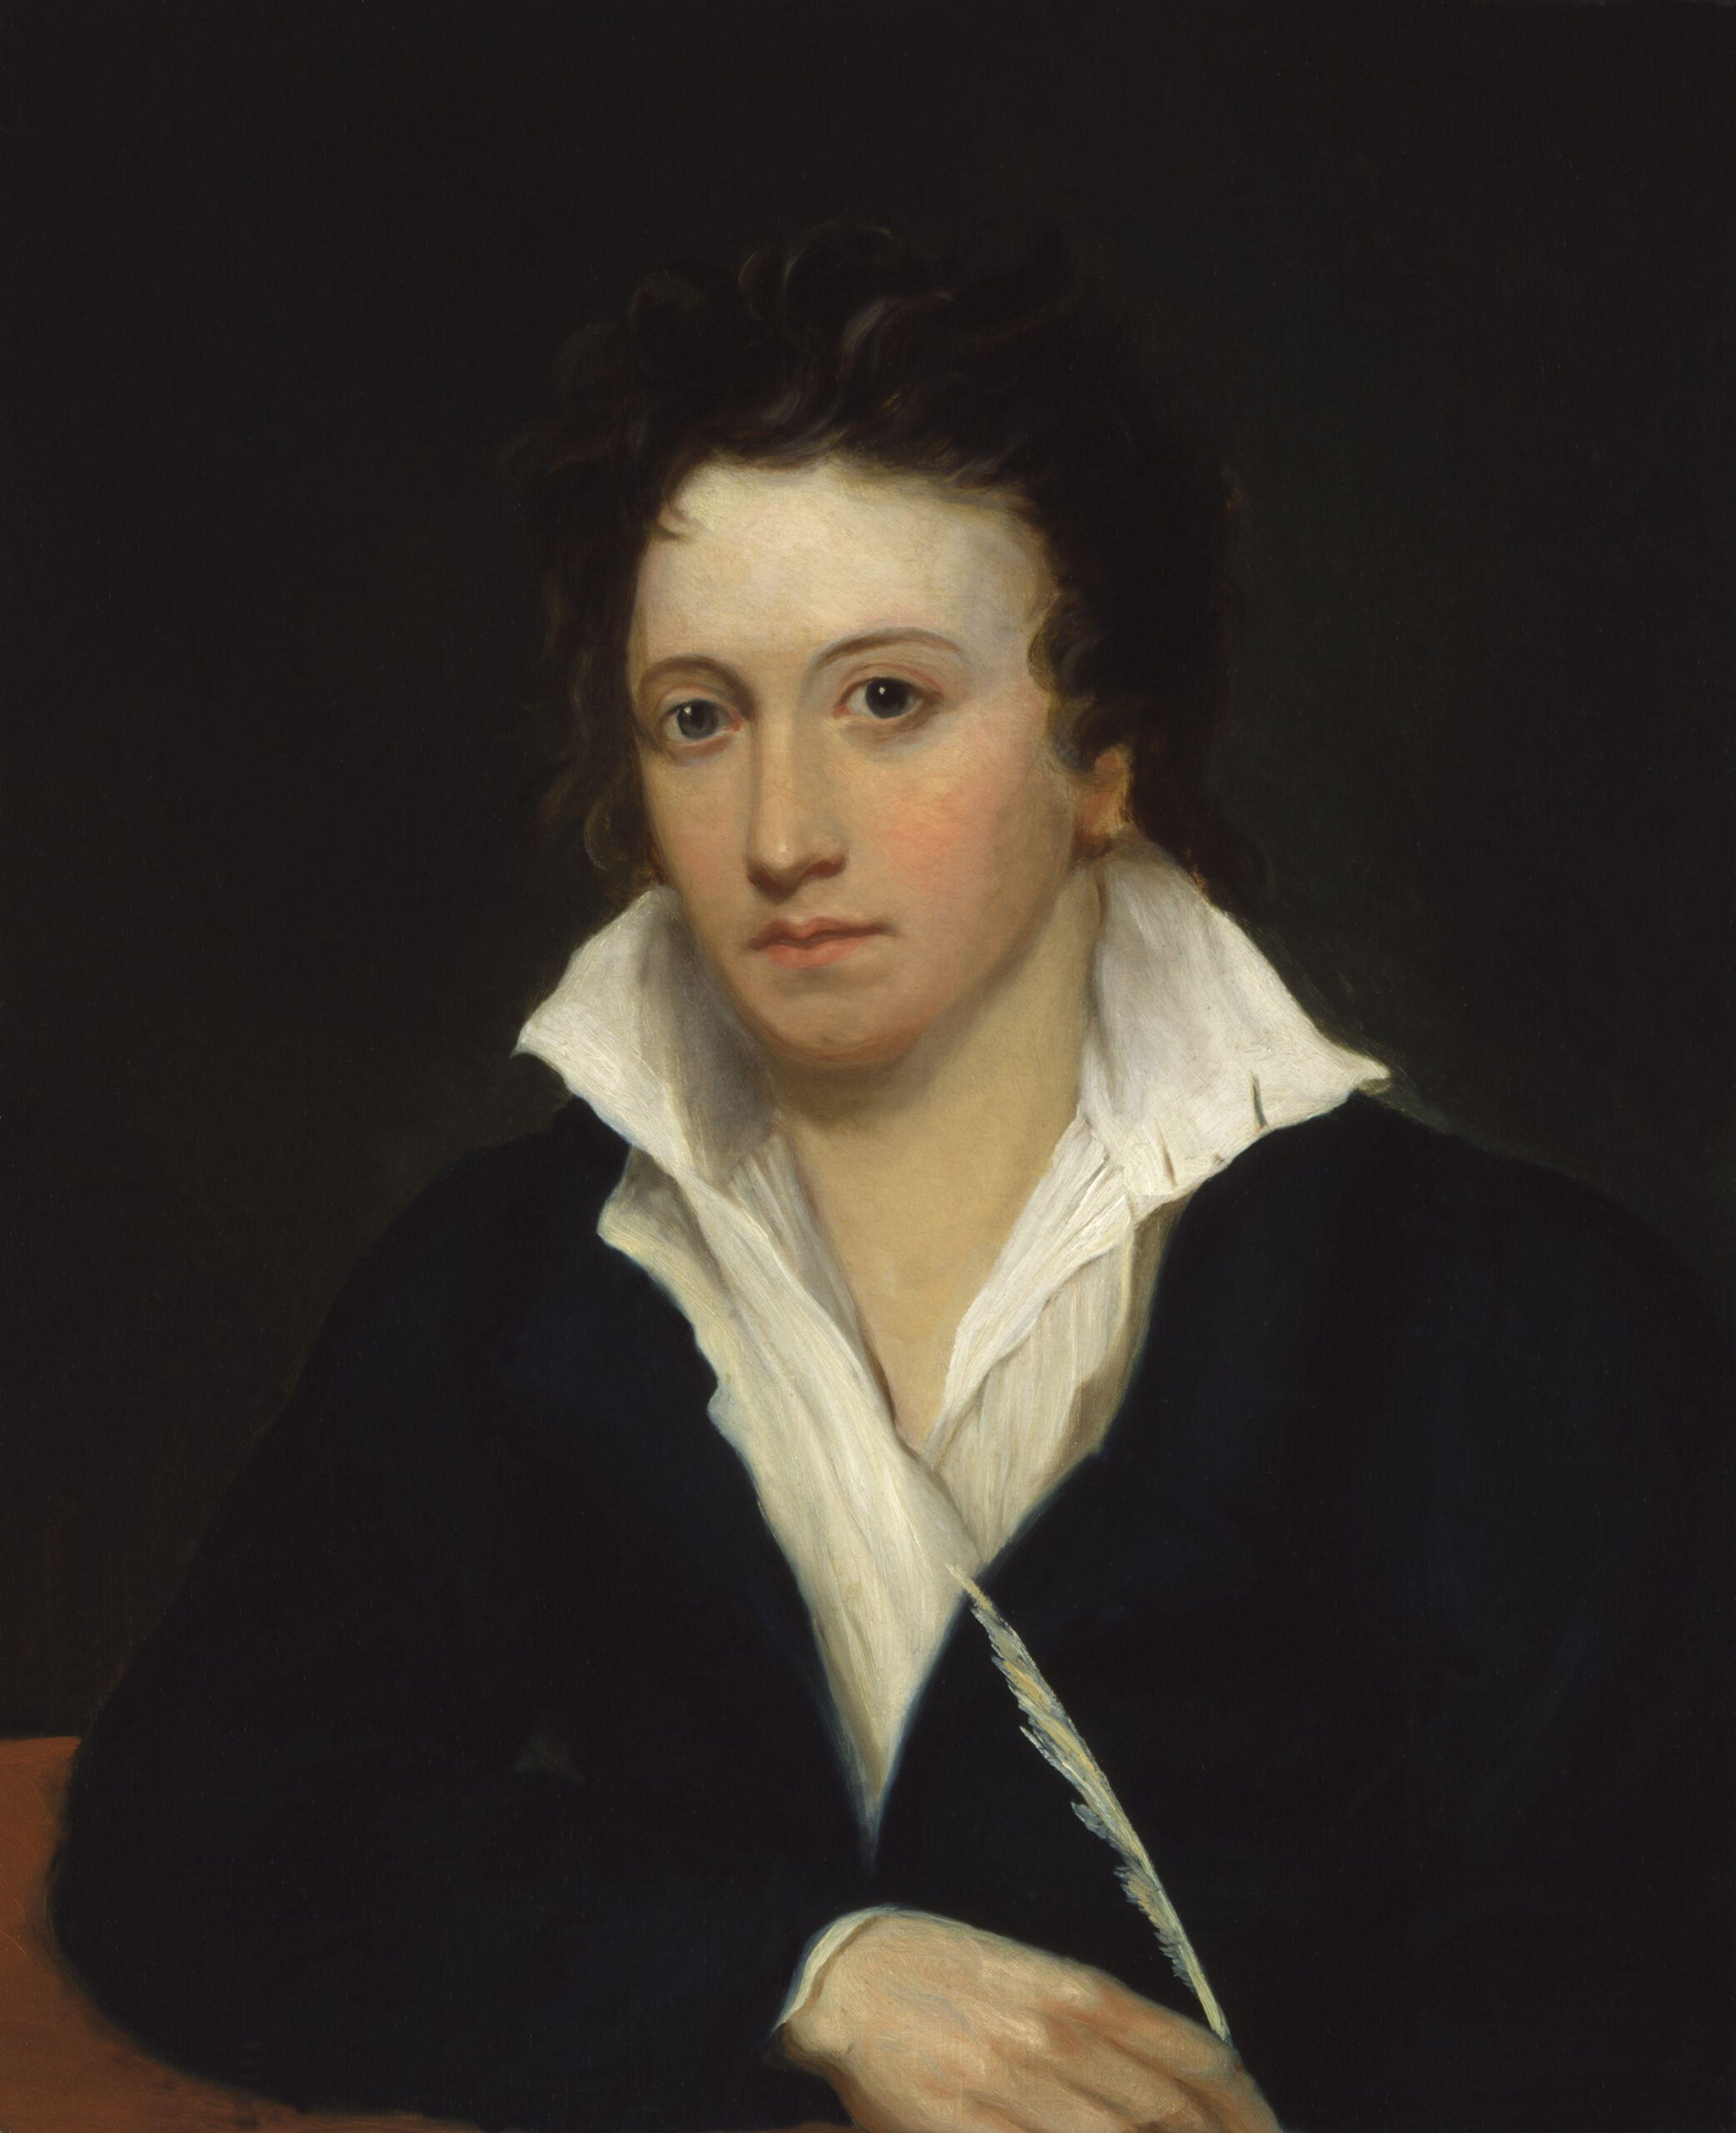 Works by Percy Shelley